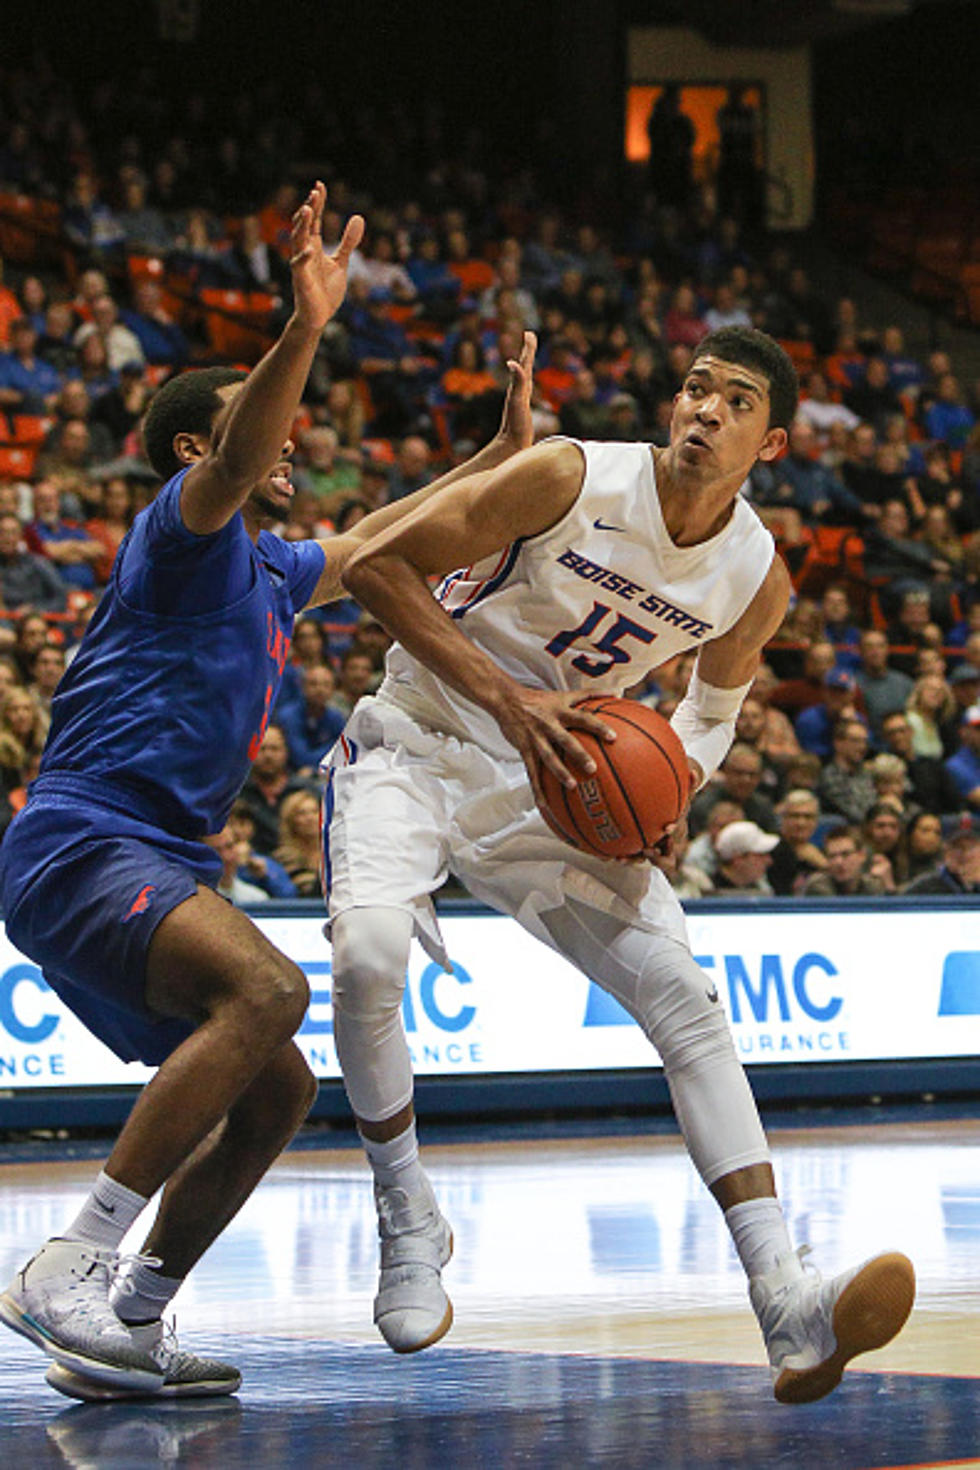 Boise State’s Hutchison Selected Mountain West Pre-Season Player of Year